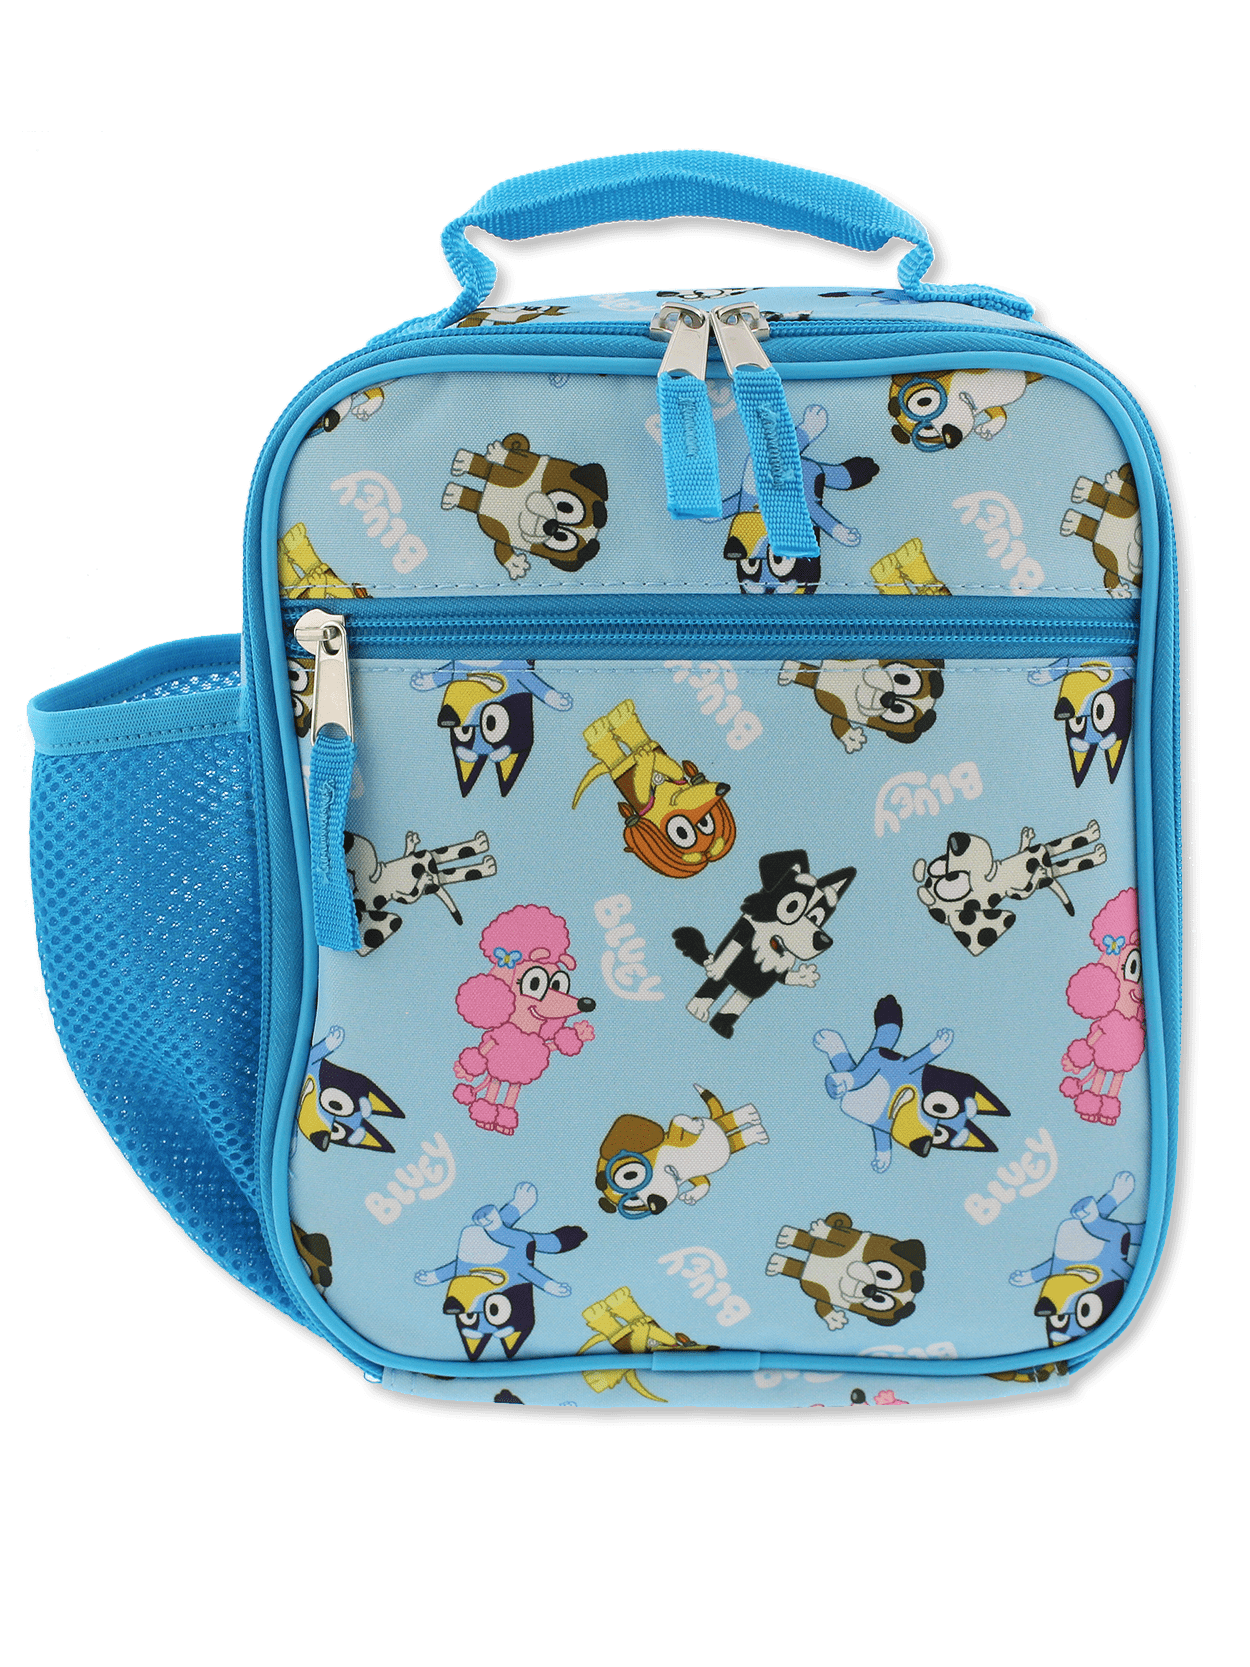 Greenbrier International, Inc. Bluey Lunch Box 2 Piece Set Kit - Includes 1 Reusable Sandwich Container and 1 Snack Bowl Kids Lunch Box Travel to Go